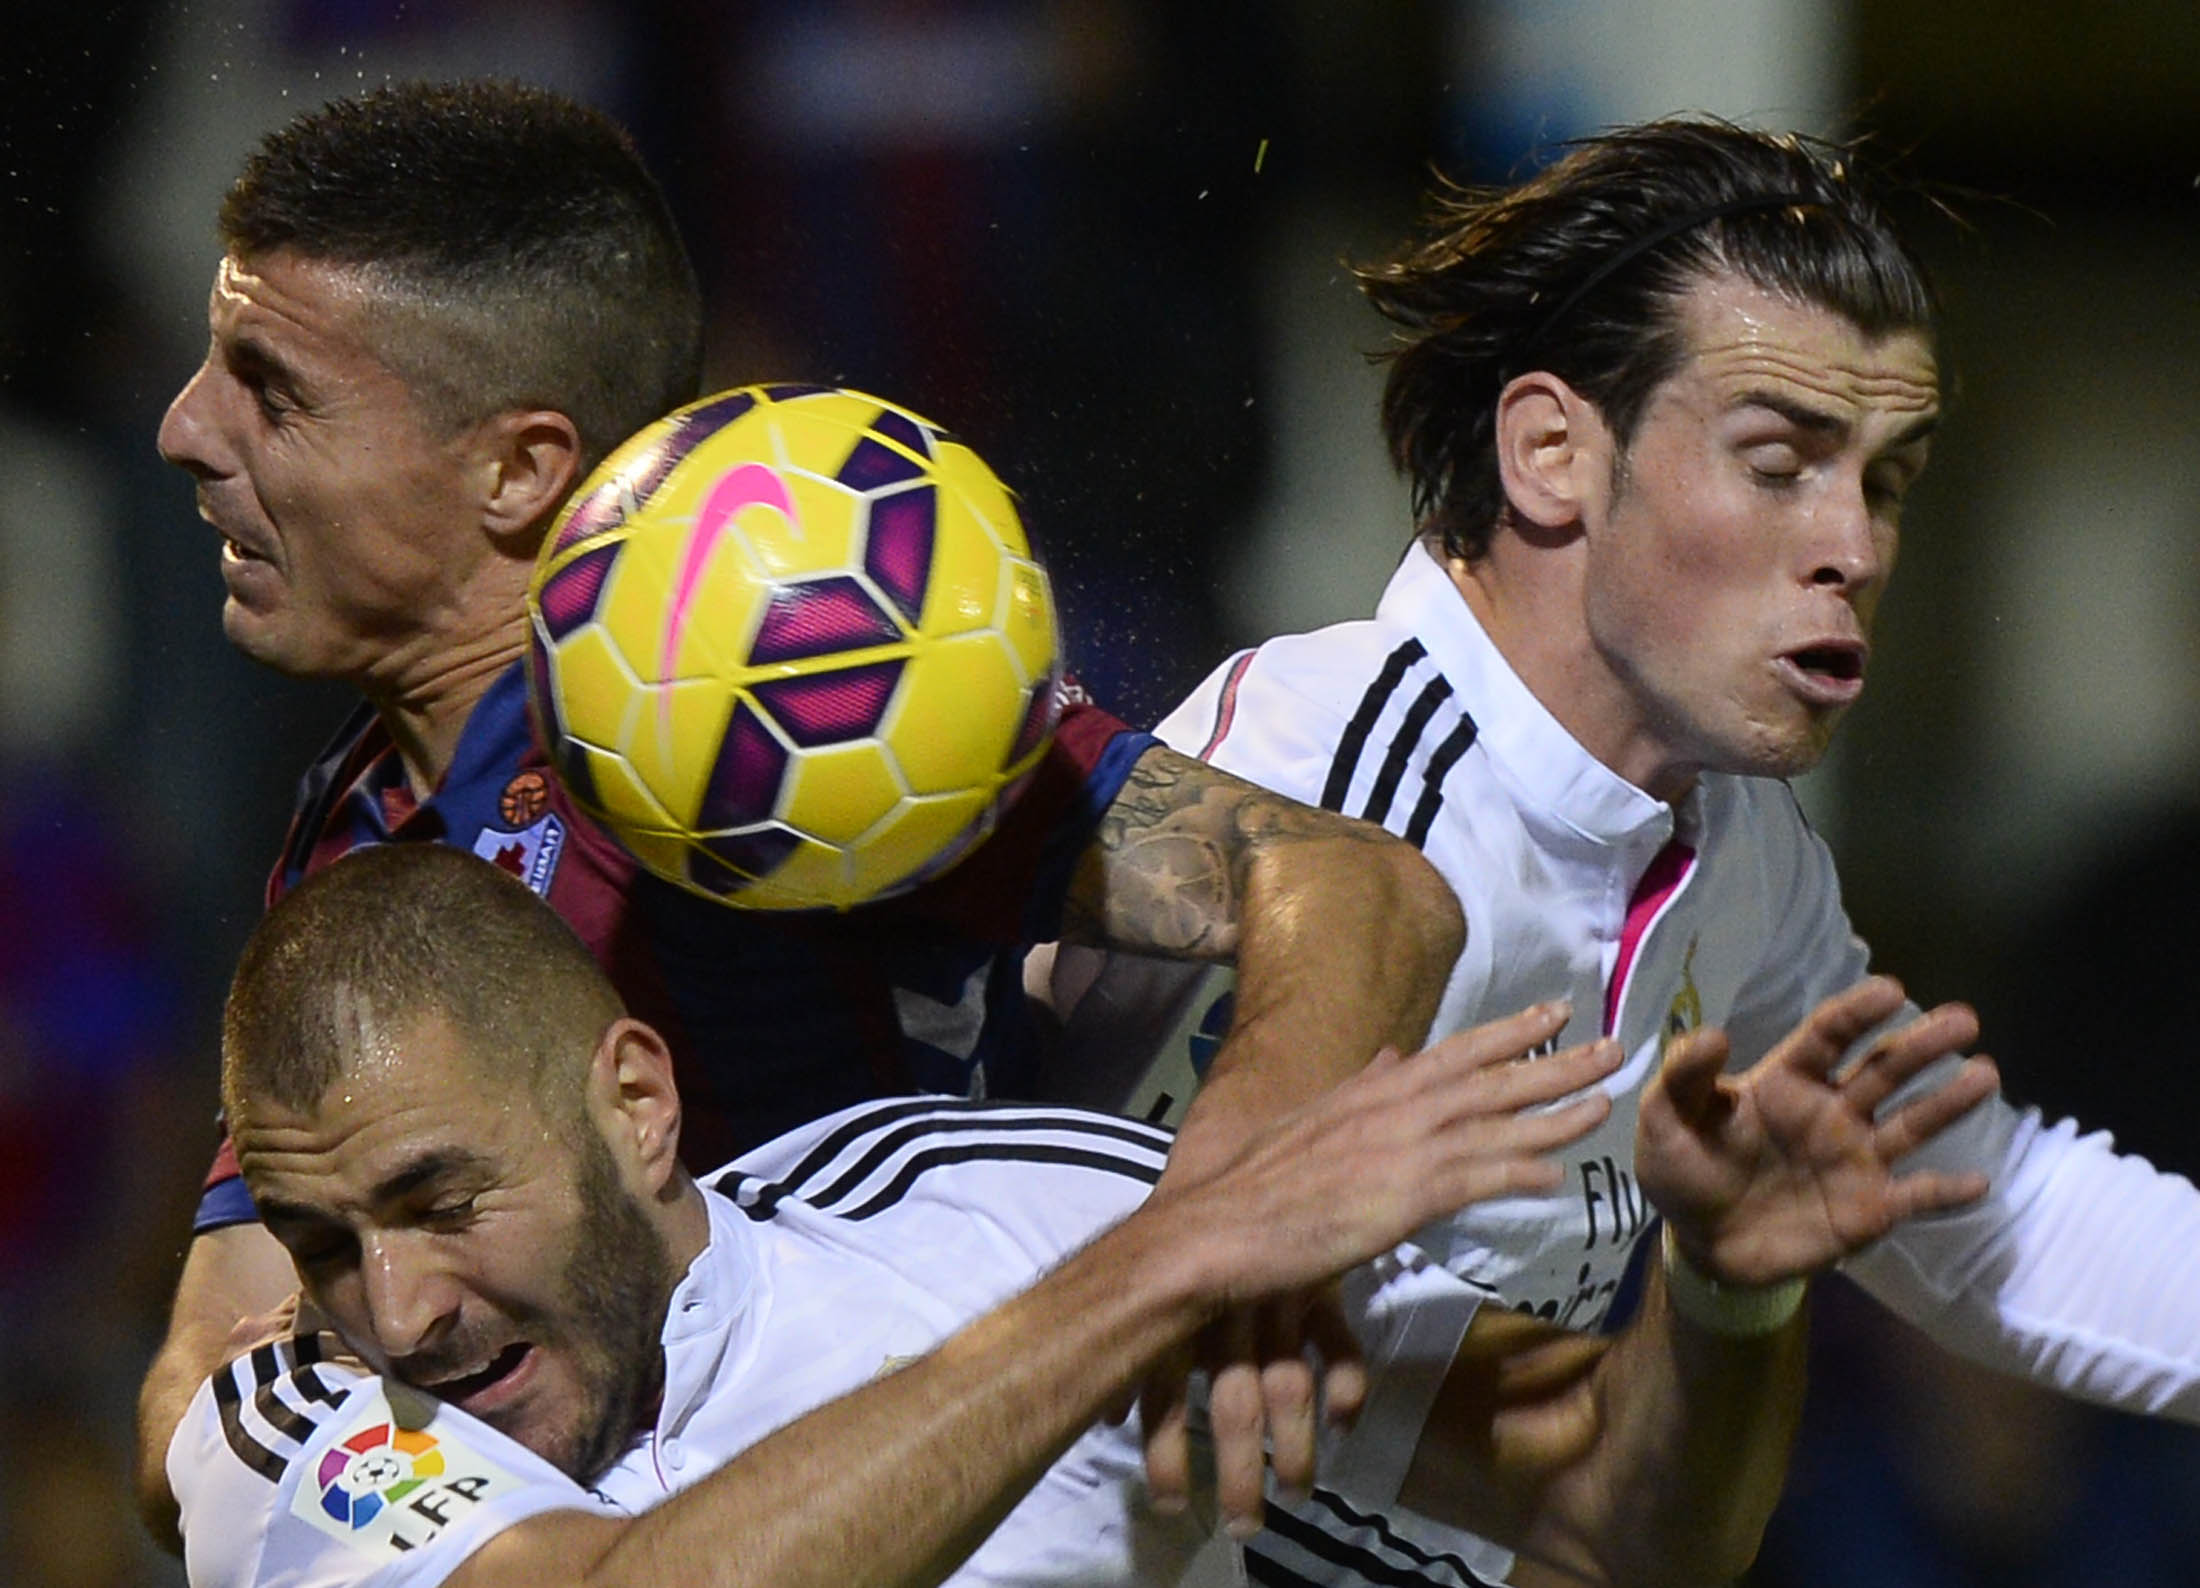 Real Madrid's Karim Benzema (bottom) and Gareth Bale (R) leap for the ball with Eibar's Abraham Minero during their Spanish first division soccer match at Ipurua stadium in Eibar, November 22, 2014. REUTERS/Vincent West (SPAIN - Tags: SPORT SOCCER TPX IMAGES OF THE DAY)